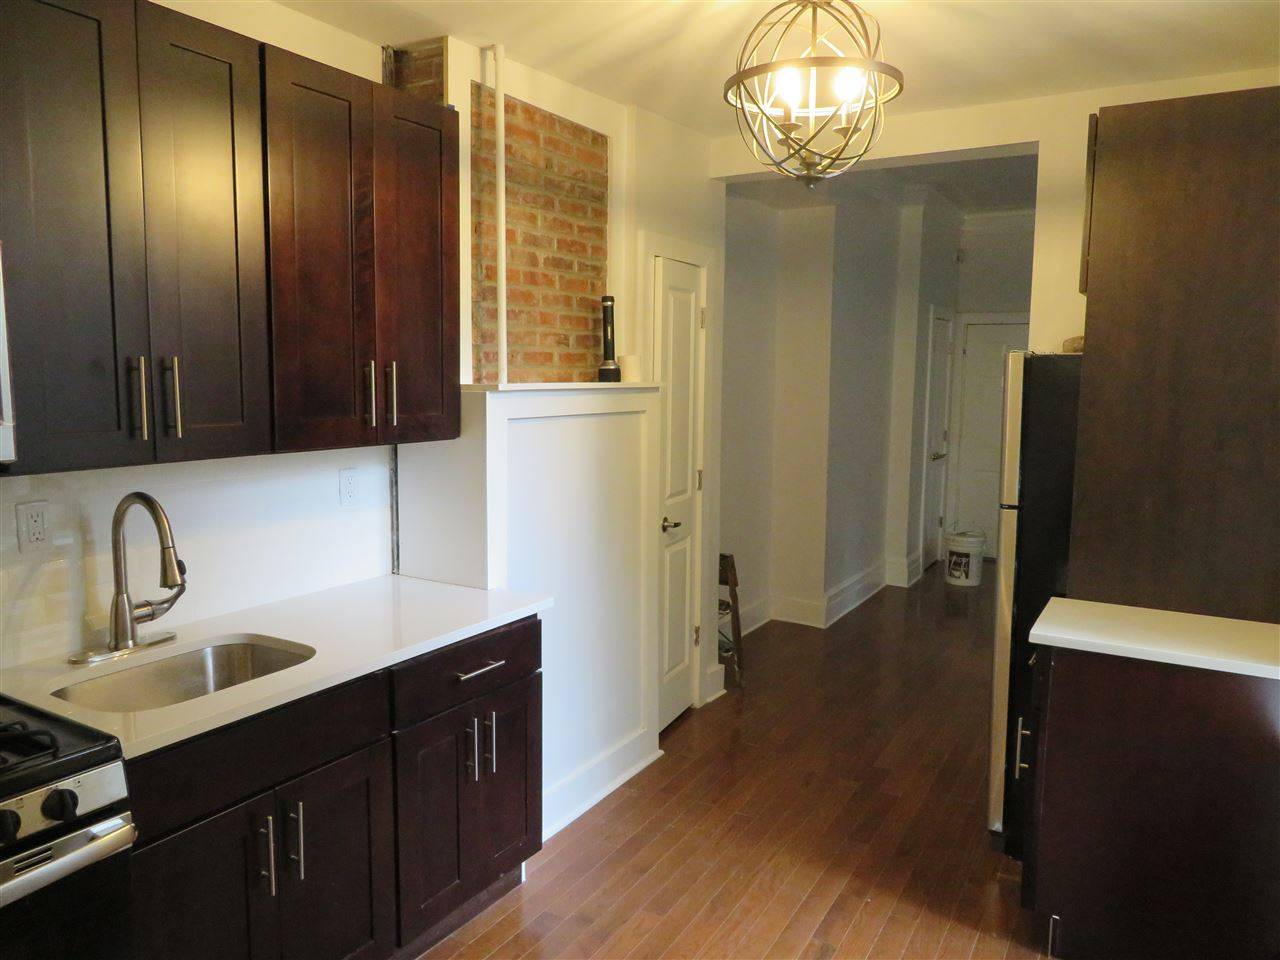 This is a all-new renovated 3 bedroom apt - 3 BR New Jersey